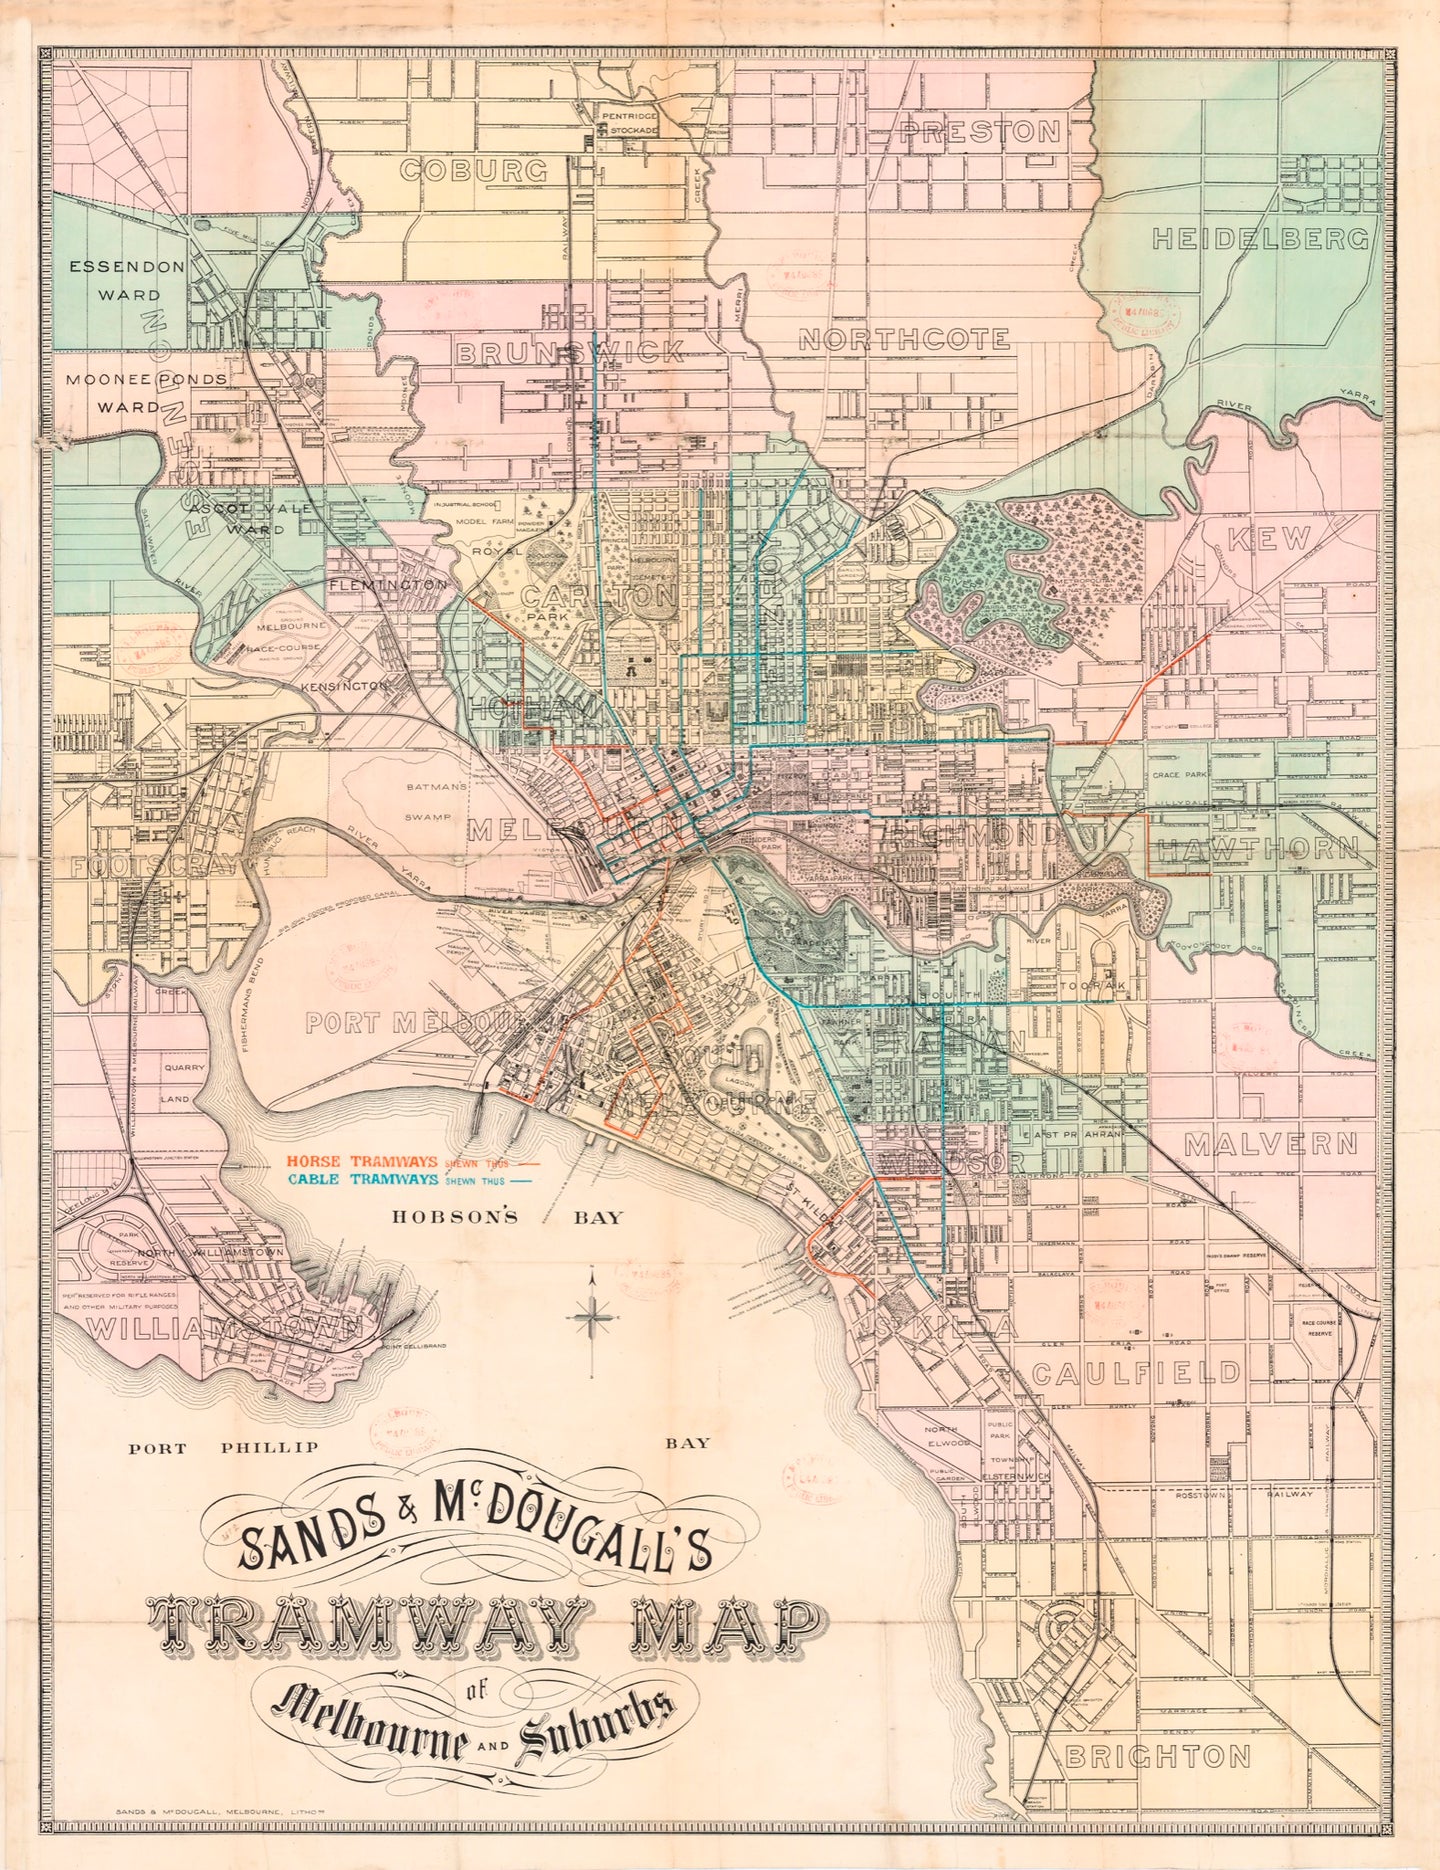 Sands & McDougall's Tramway Map of Melbourne and Suburbs